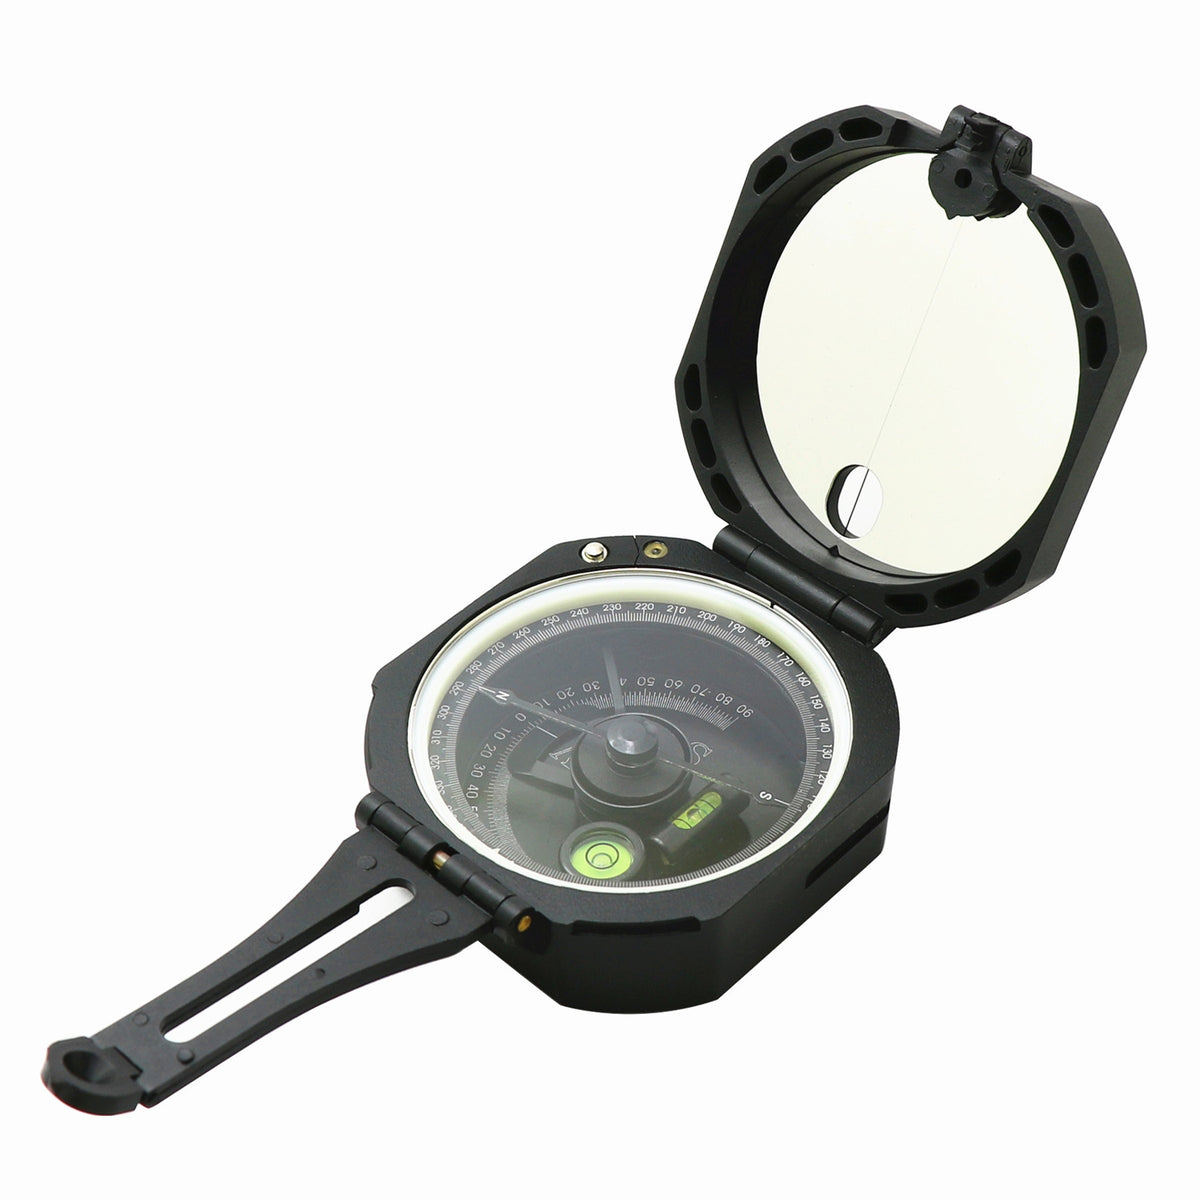 M2 Multifunctional American Black Compass Pointing Needle